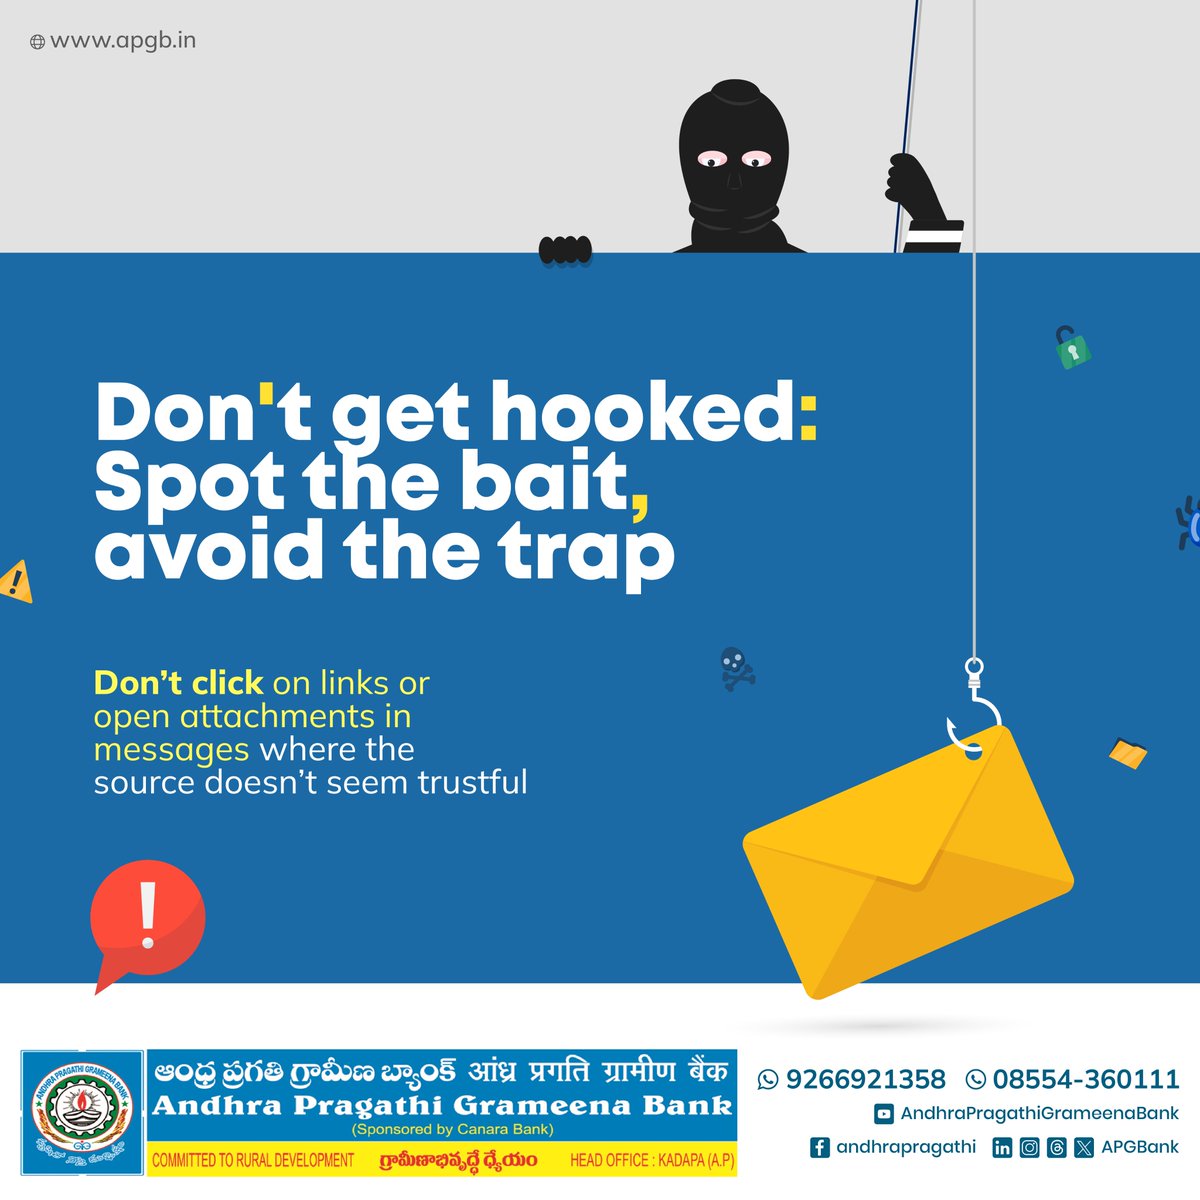 Don't get hooked: Spot the bait, avoid the trap
Don't click on links or open attachments in messages where the source doesn't seem trustful

#andhrapragathigrameenabank #apg #cybersecurity #onlinefrauds #banking #loans